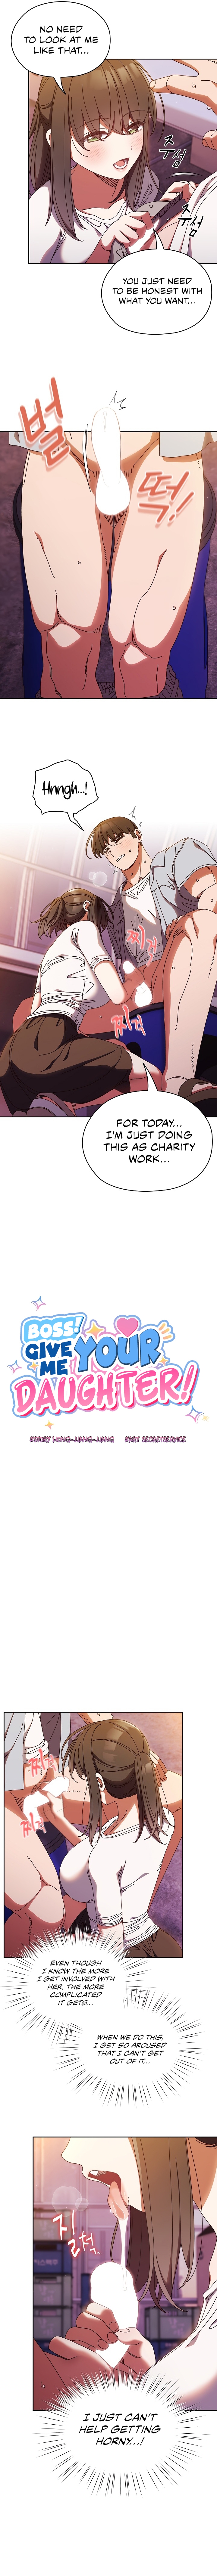 Boss! Give me your daughter! NEW image